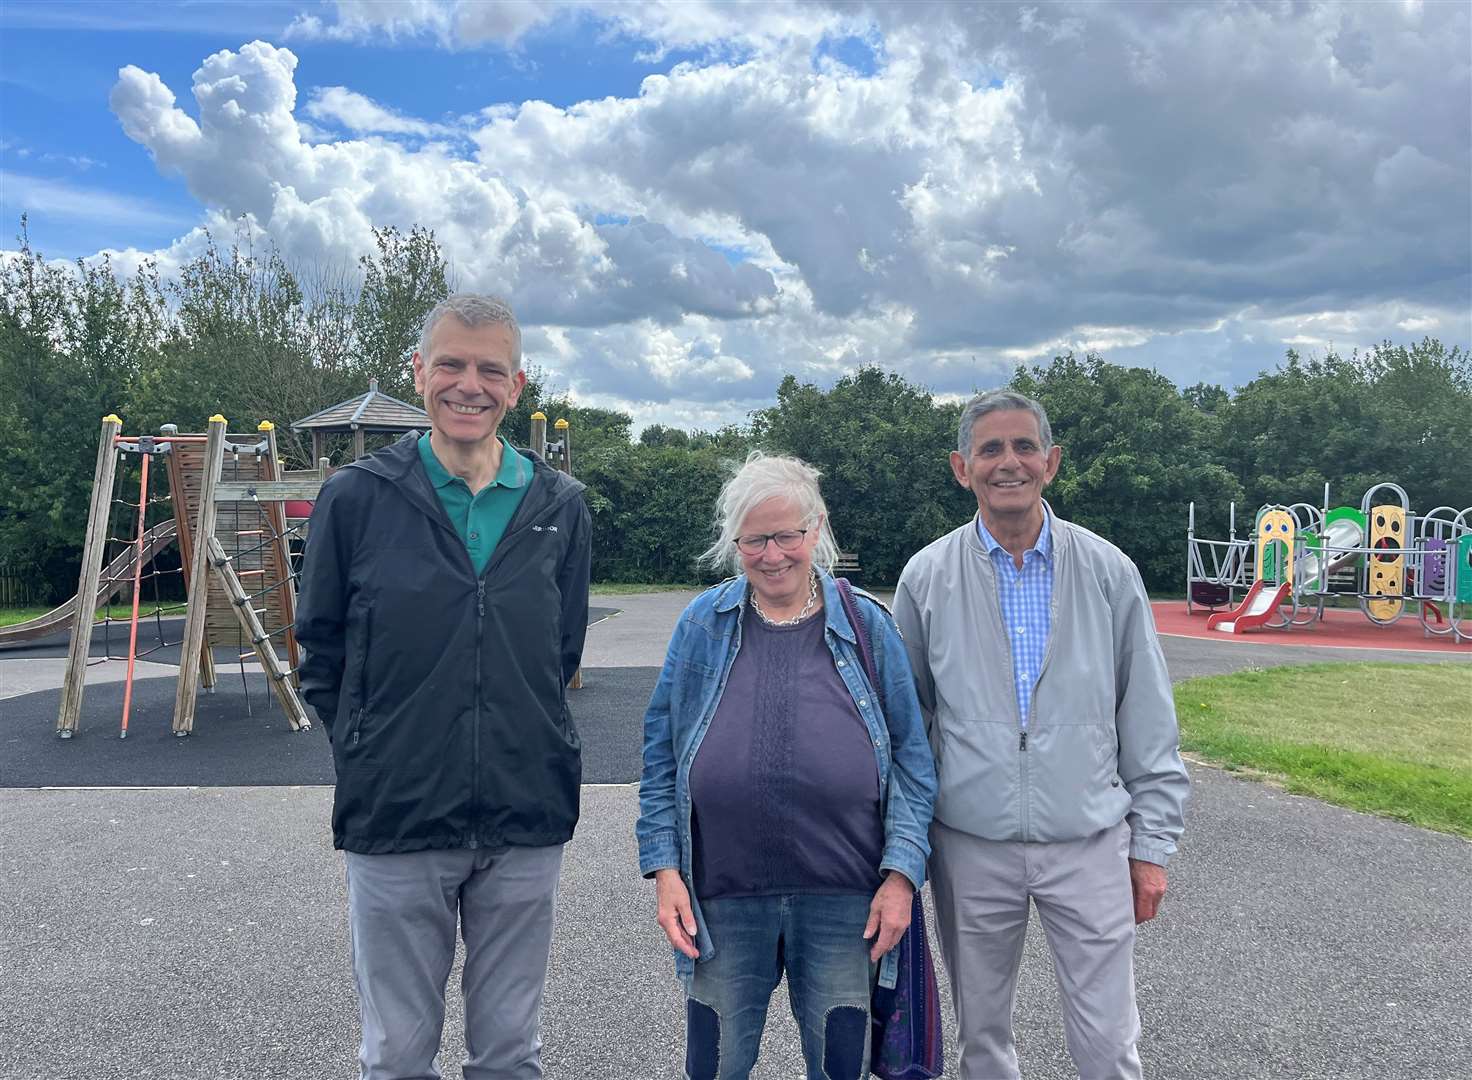 Cllr Paul Bartlett (left), Cllr Liz Wright and Cllr Winston Michael are all calling for CCTV and additional lighting at the park